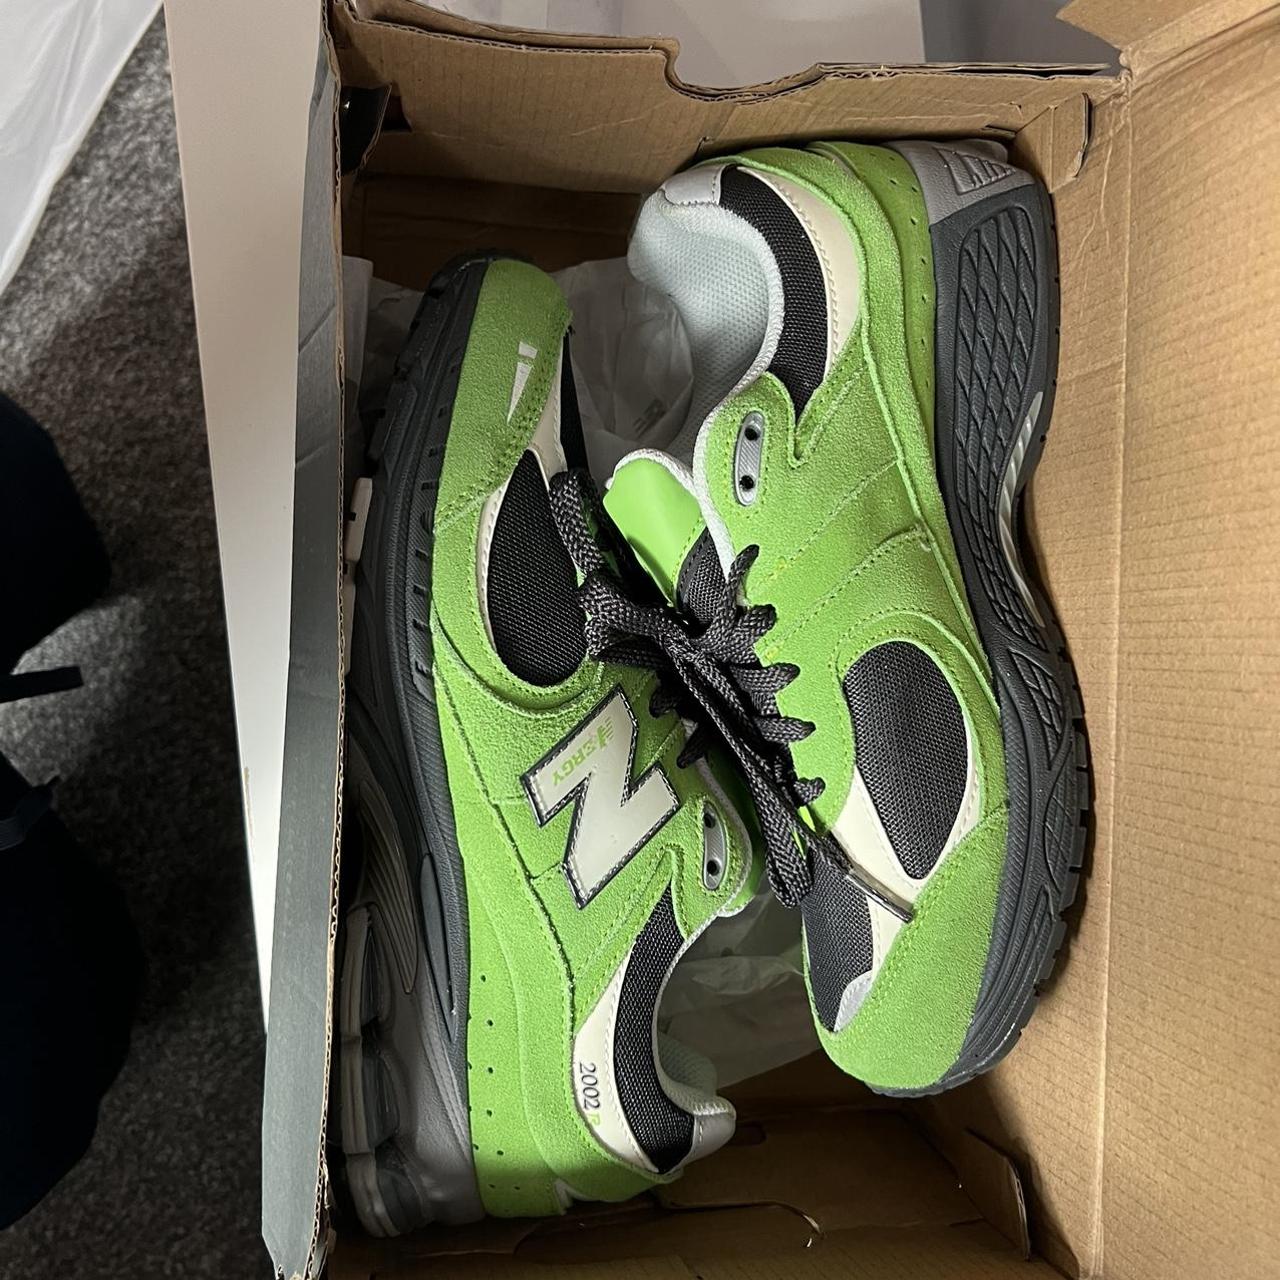 New Balance Men's Green and Black Trainers | Depop